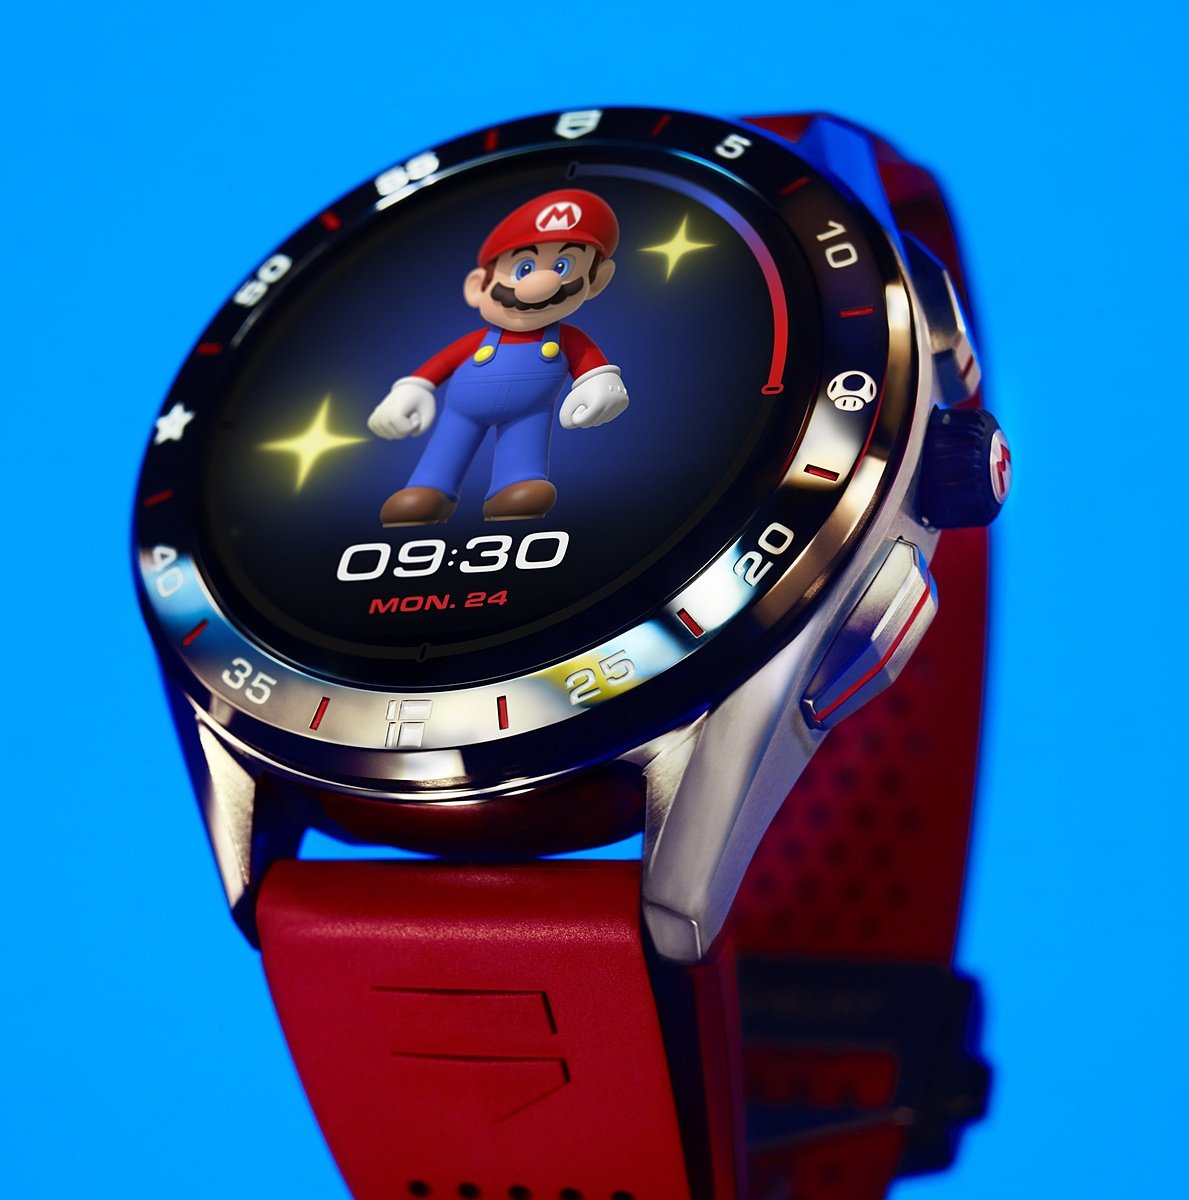 Here’s Tag Heuer’s $2,150 Super Mario watch | VGC